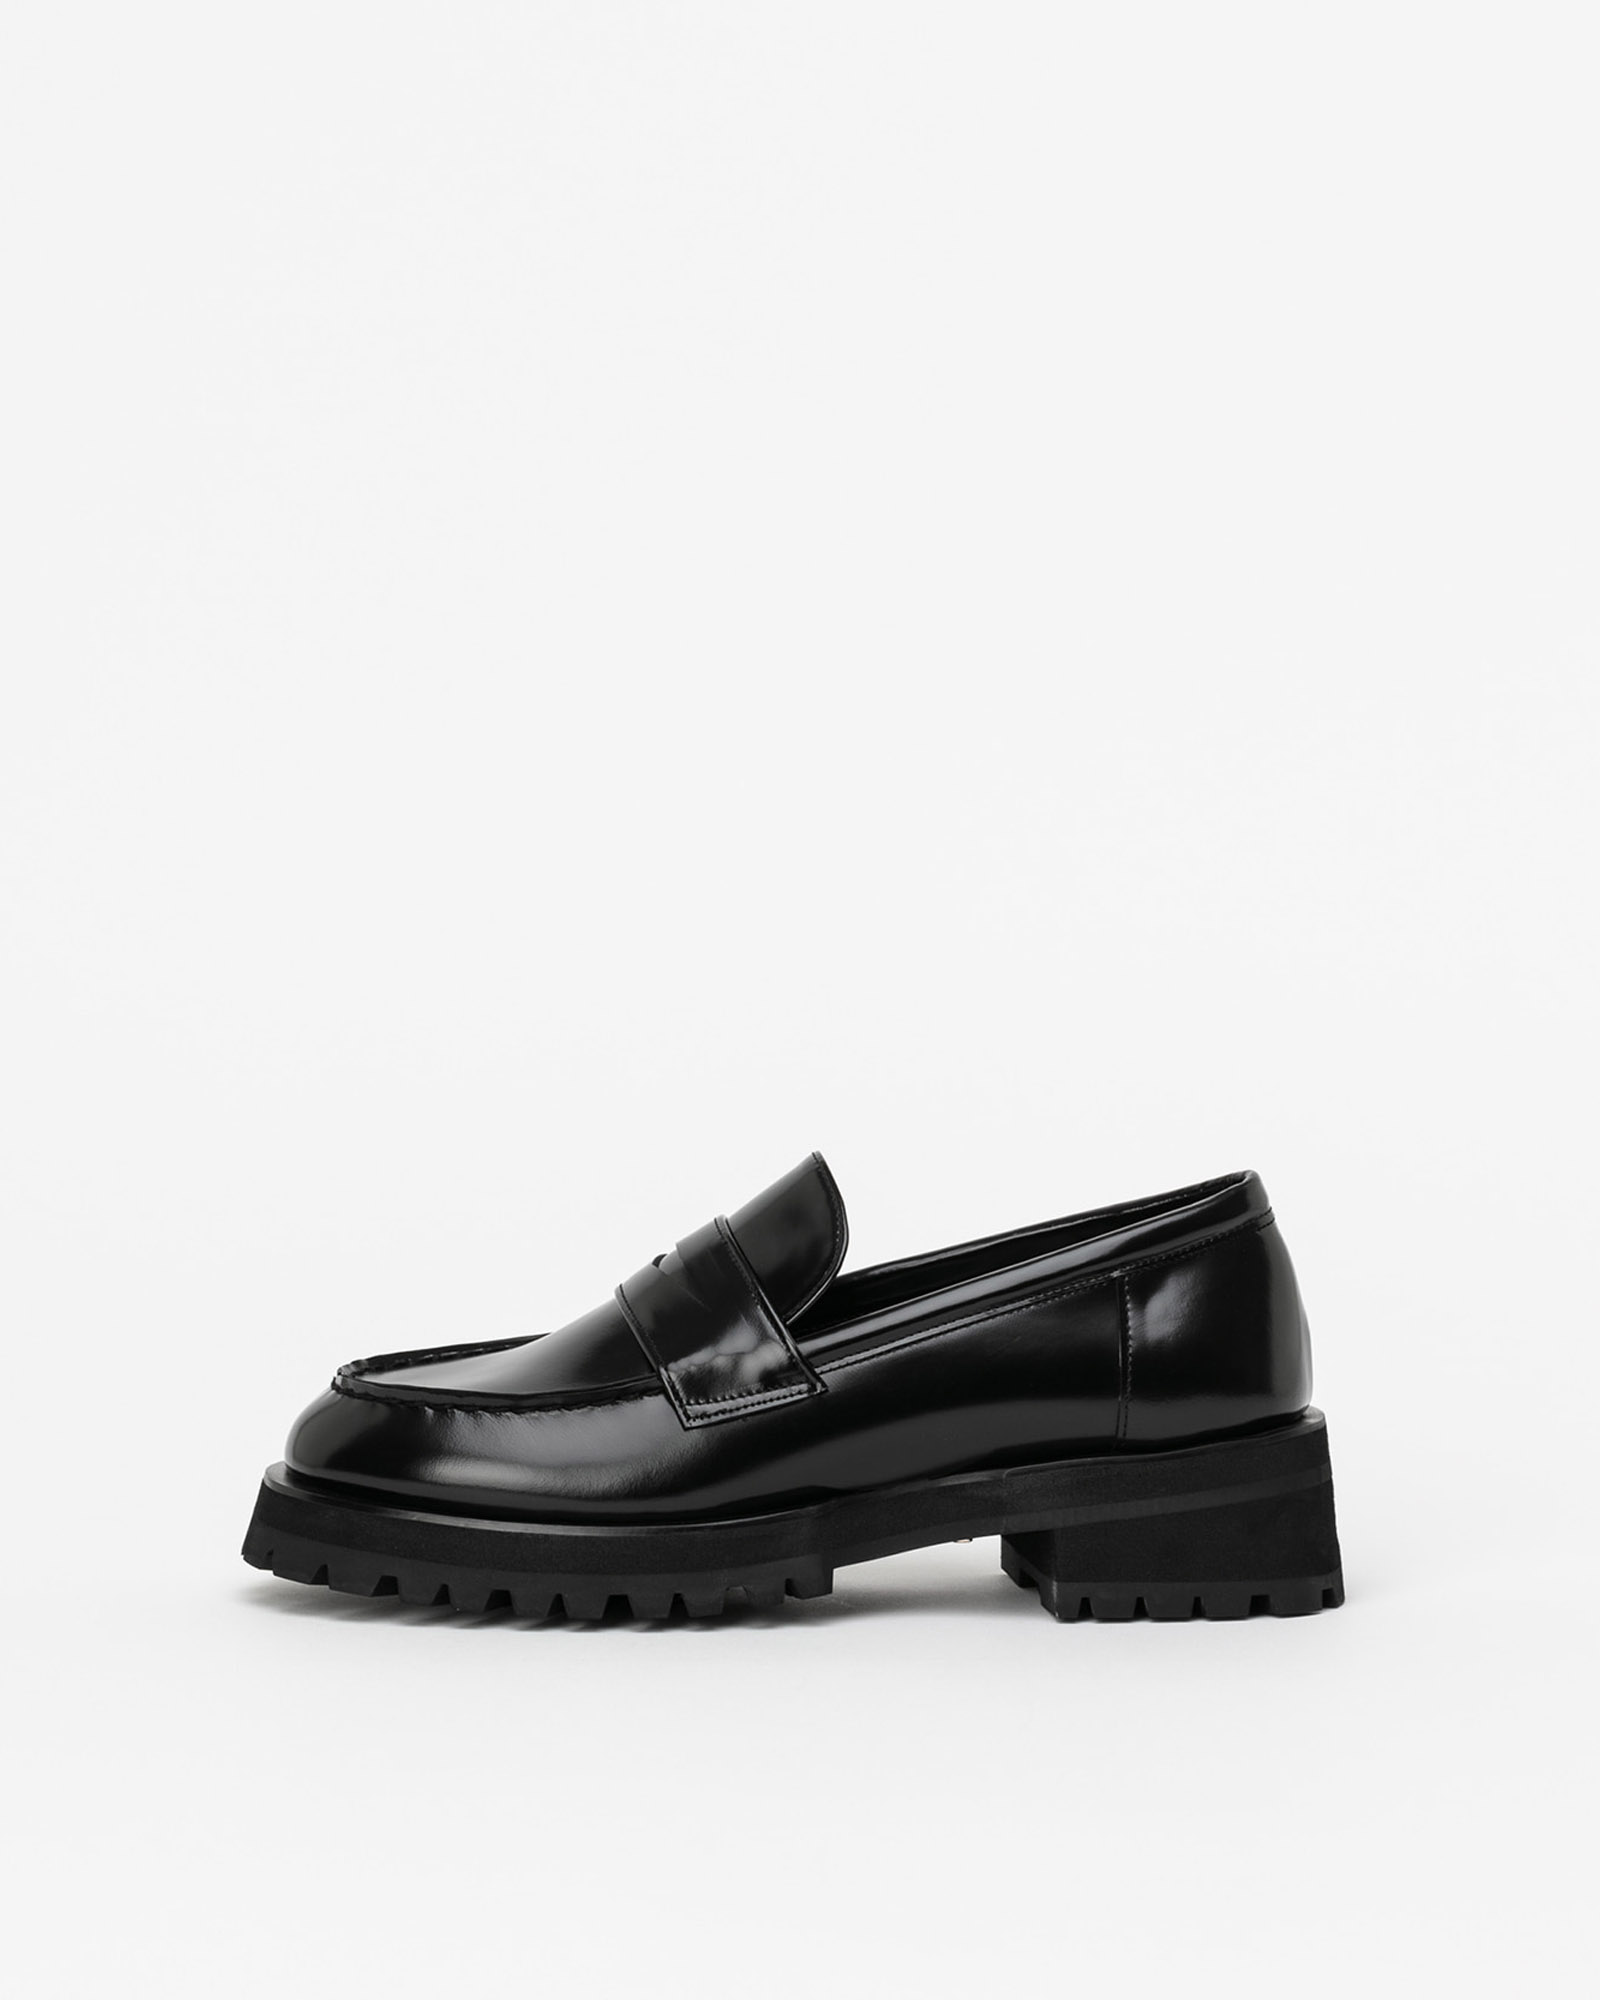 Concrese Lugsole Loafers in Black Box